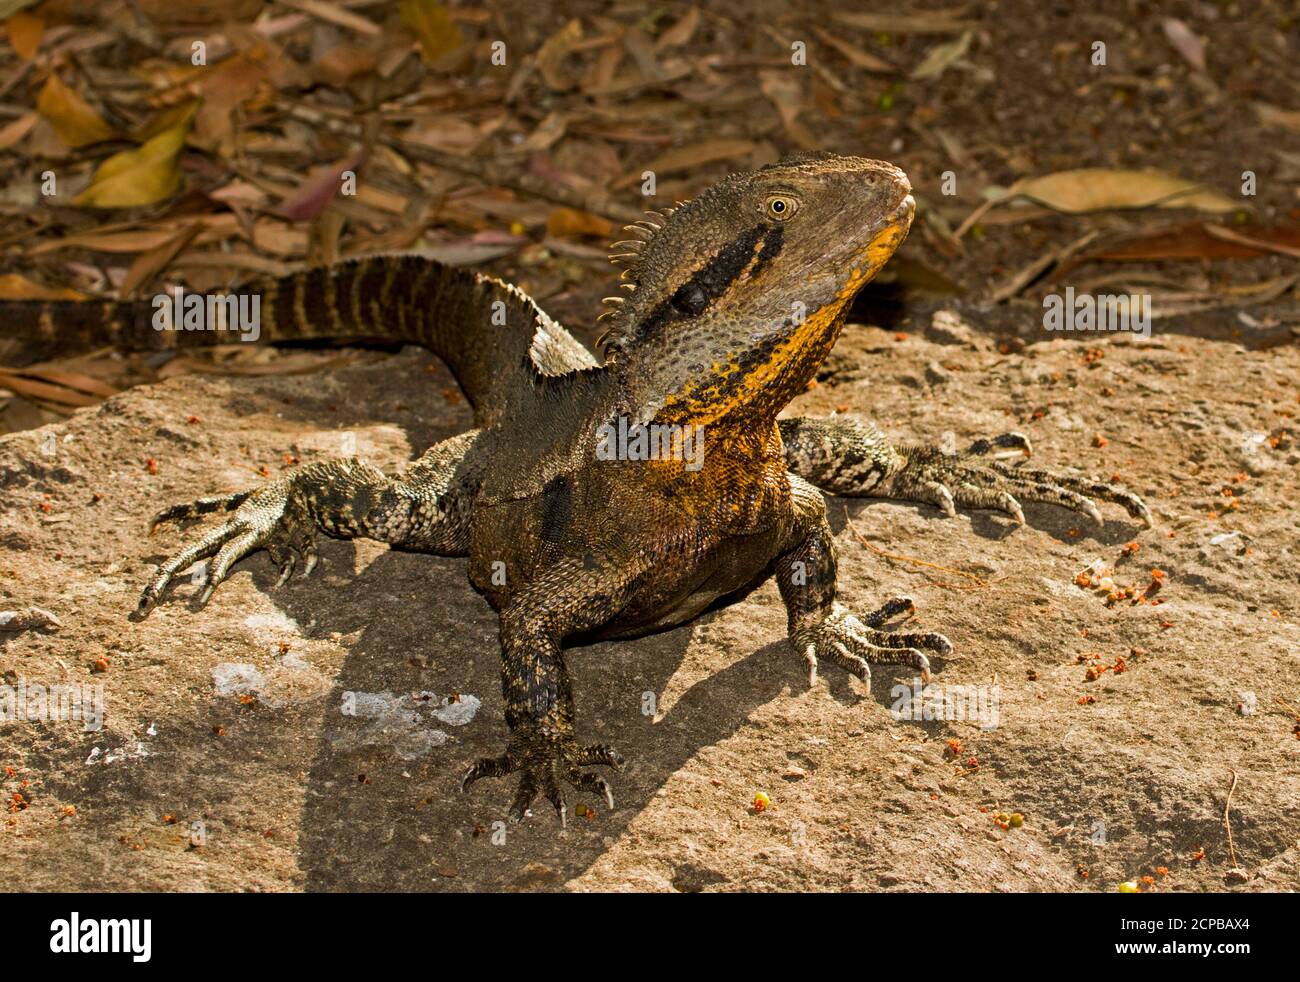 Eastern water dragon lizard, Intellagama lesueurii basking in the sun on a rock in a city park in Queensland Australia Stock Photo